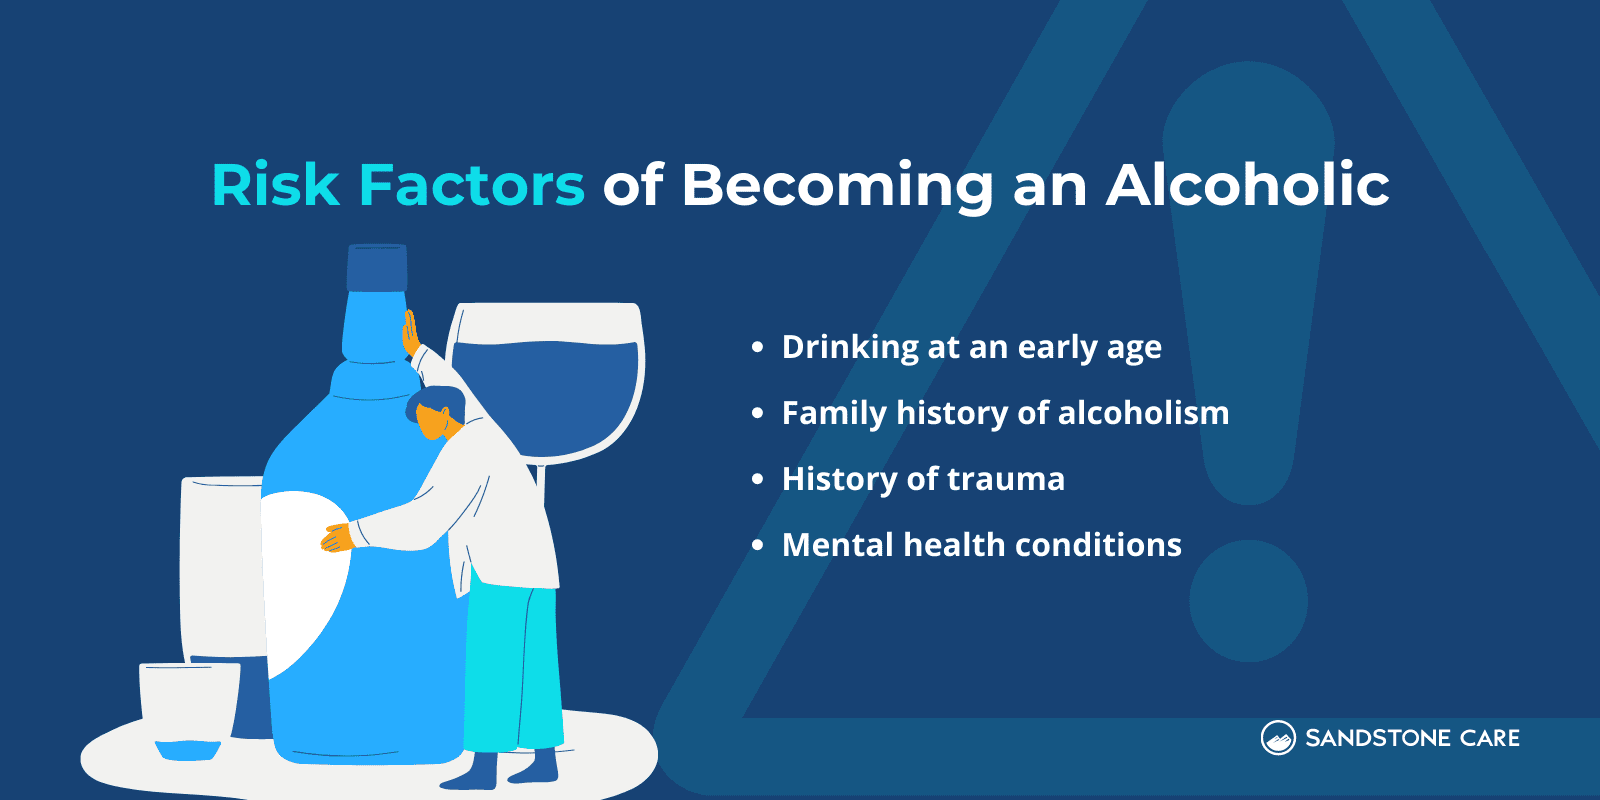 Risk Factors Of Becoming An Alcoholic written out in a bullet-pointed list next to an illustration of a human figure hugging an alcohol bottle